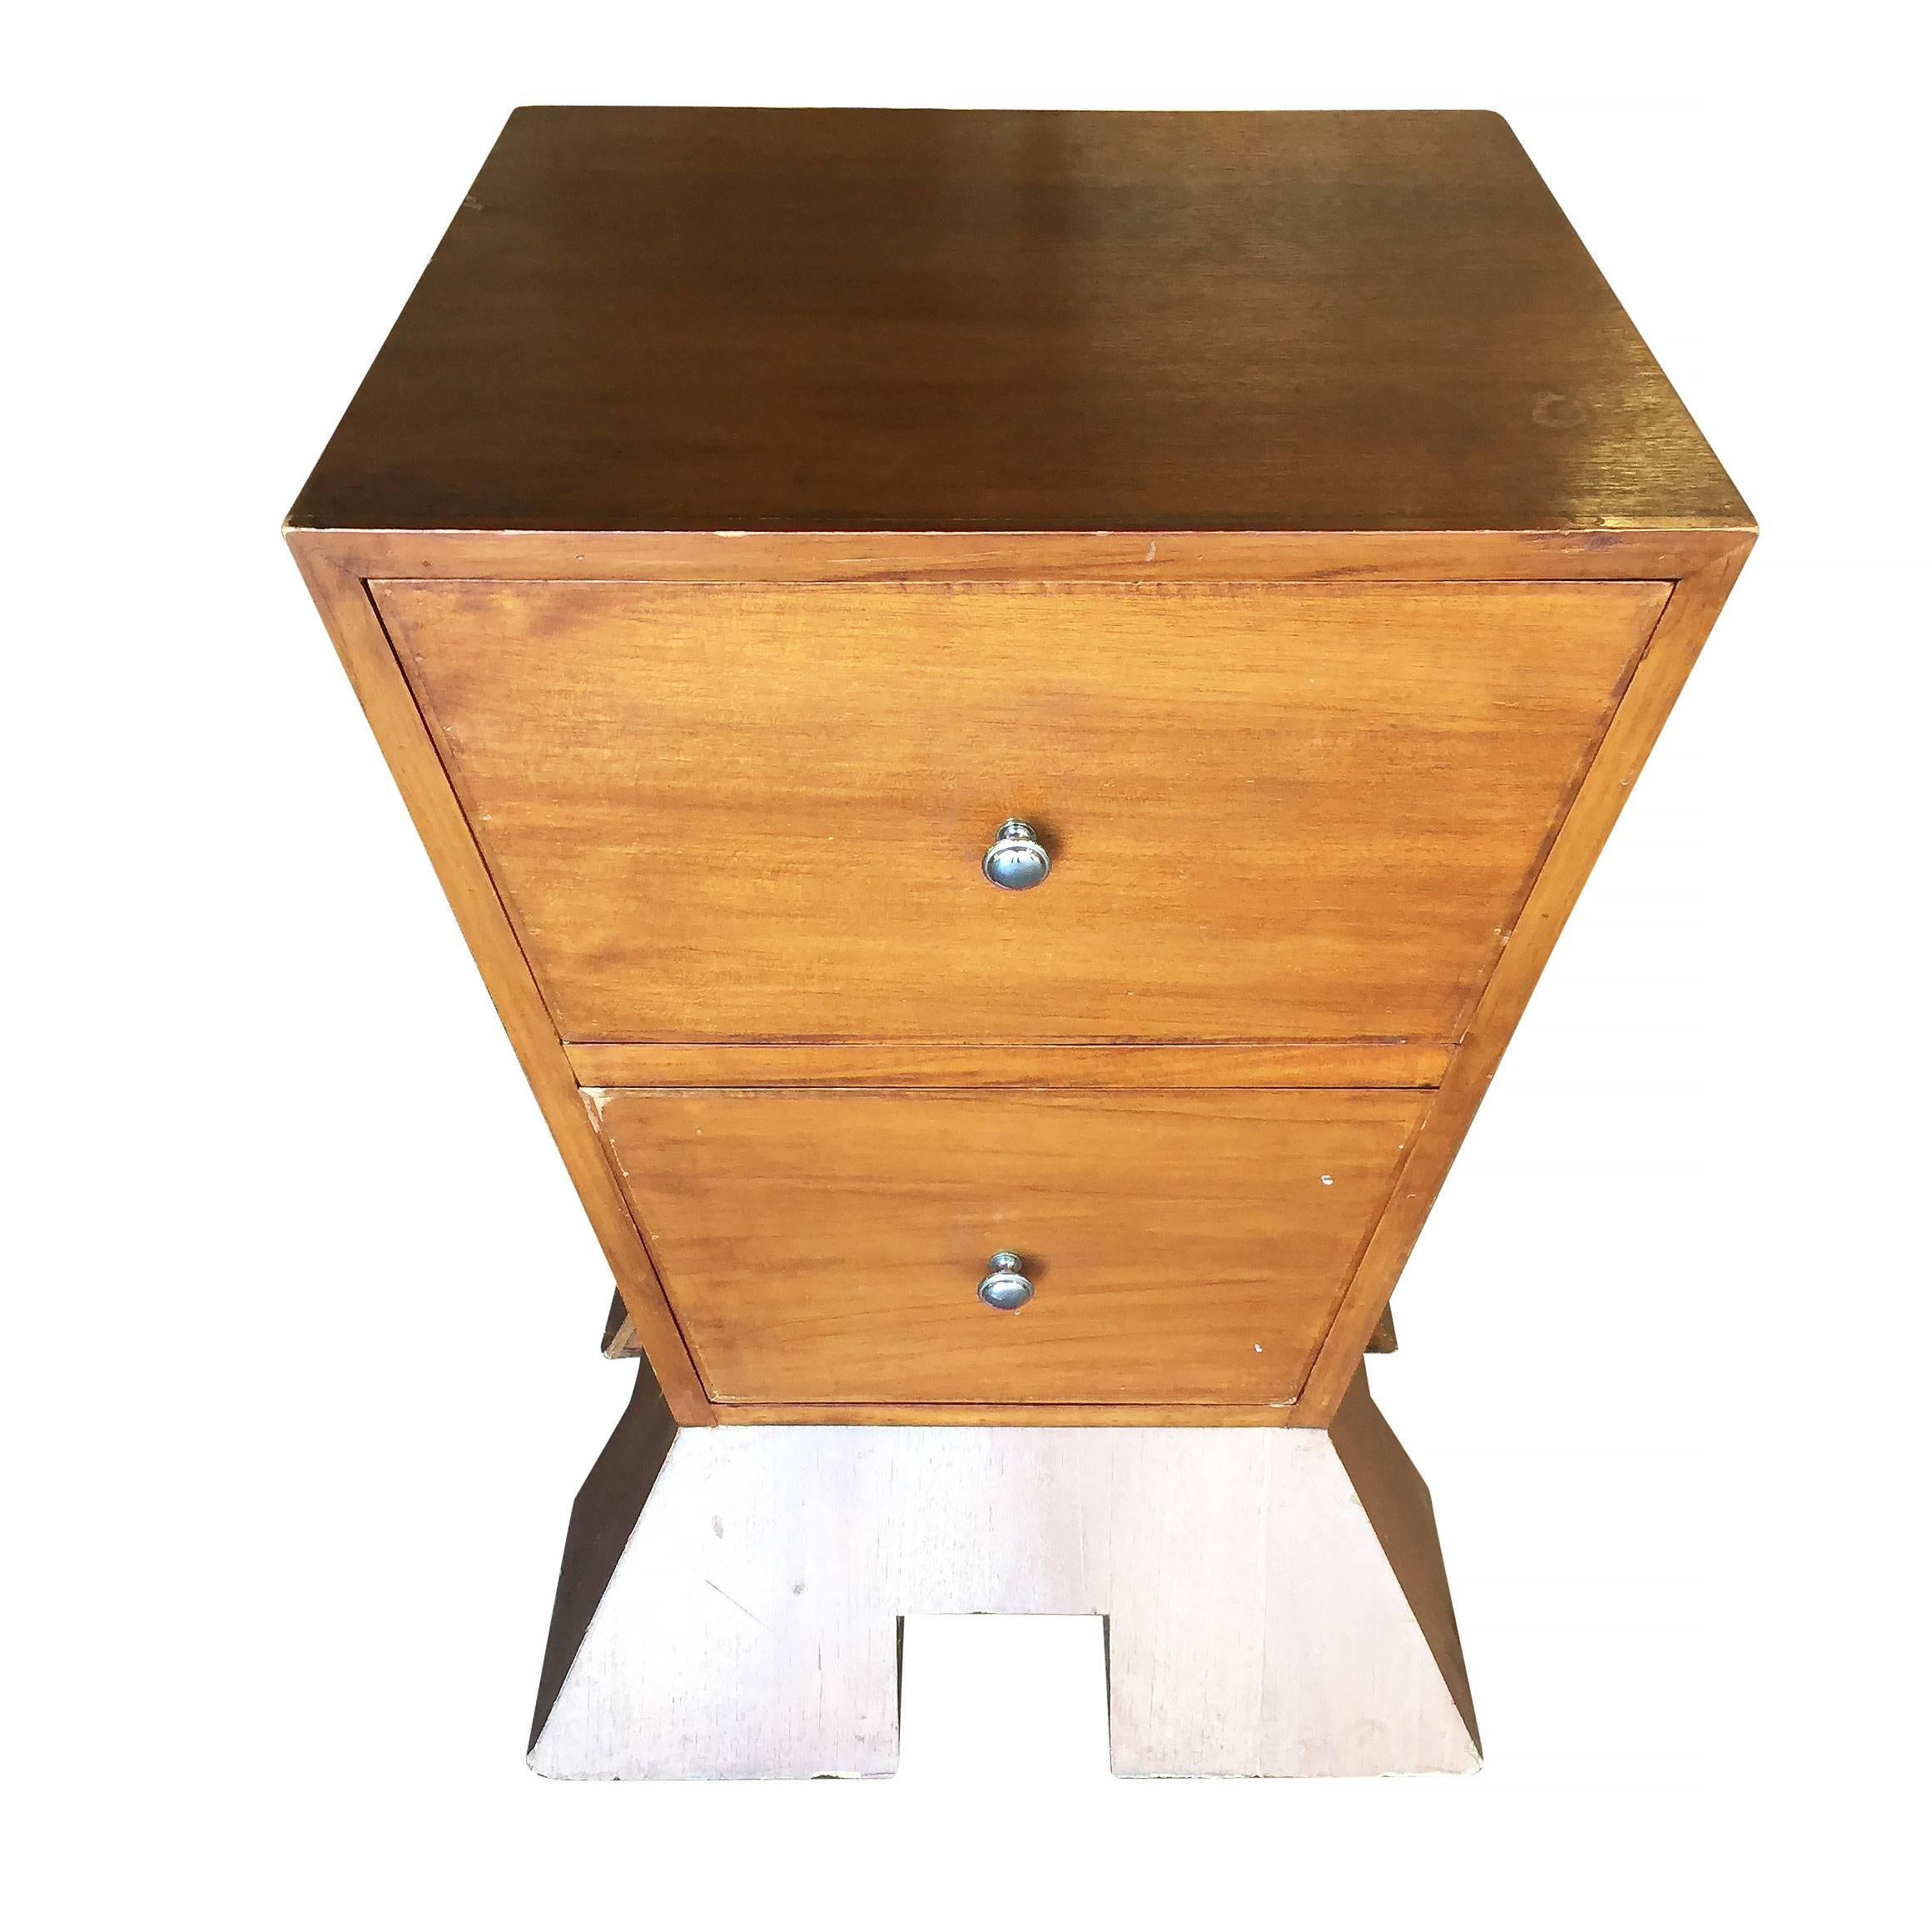 Unique modernist bedroom nightstand made of an inverted triangle on a triangular base with two drawers each with round pulls.